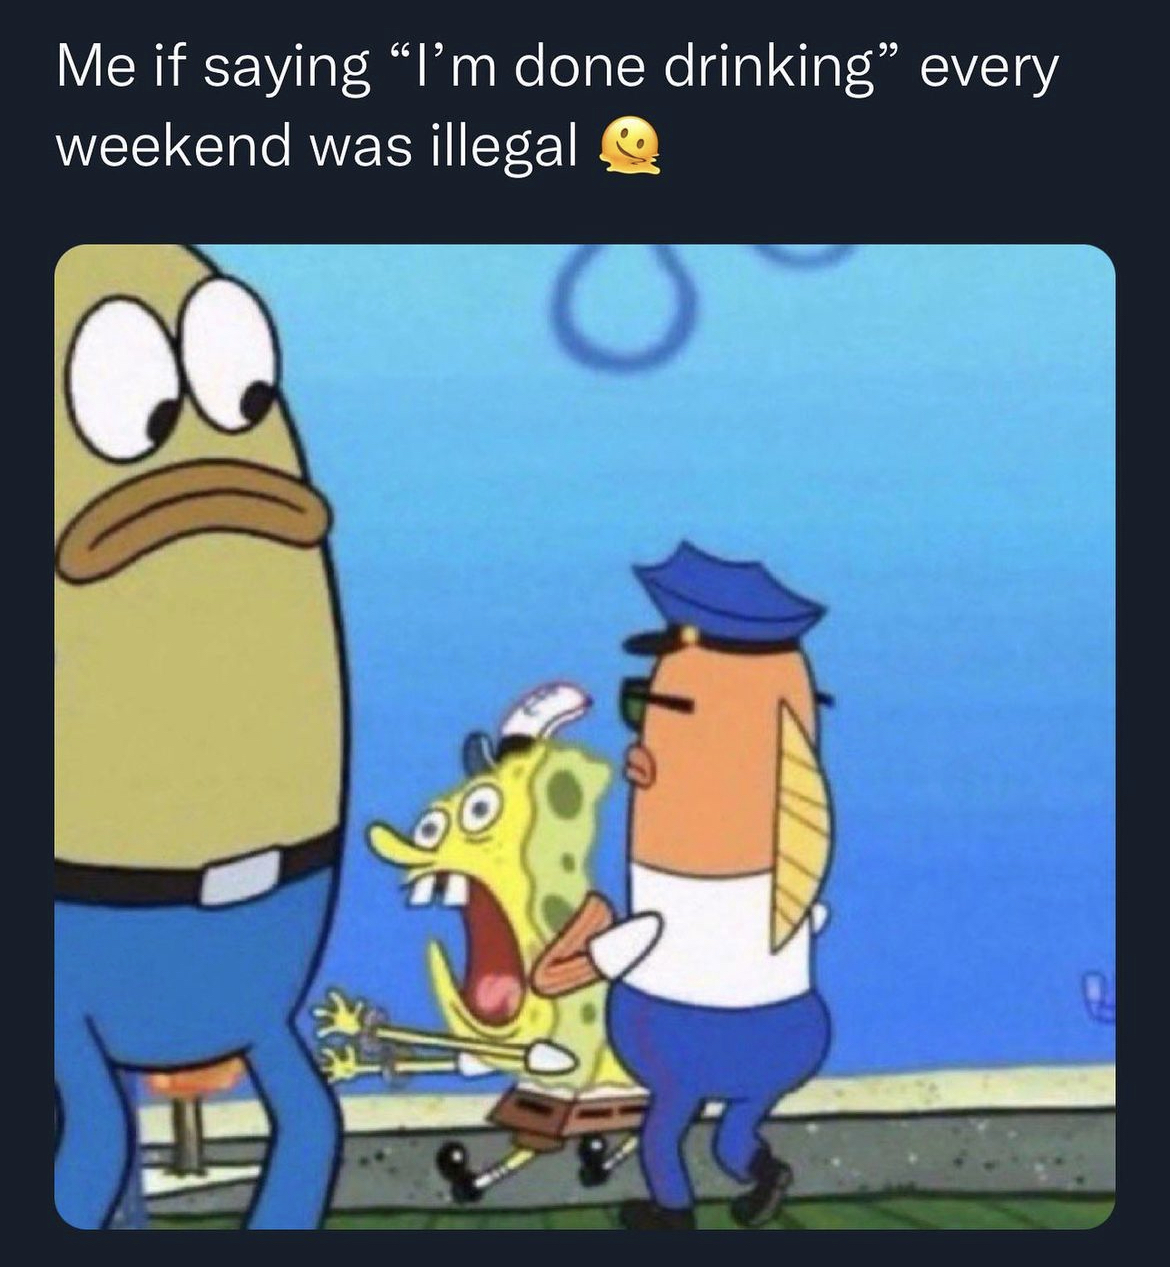 Hoodville memes and captions - cartoon - Me if saying "I'm done drinking" every weekend was illegal